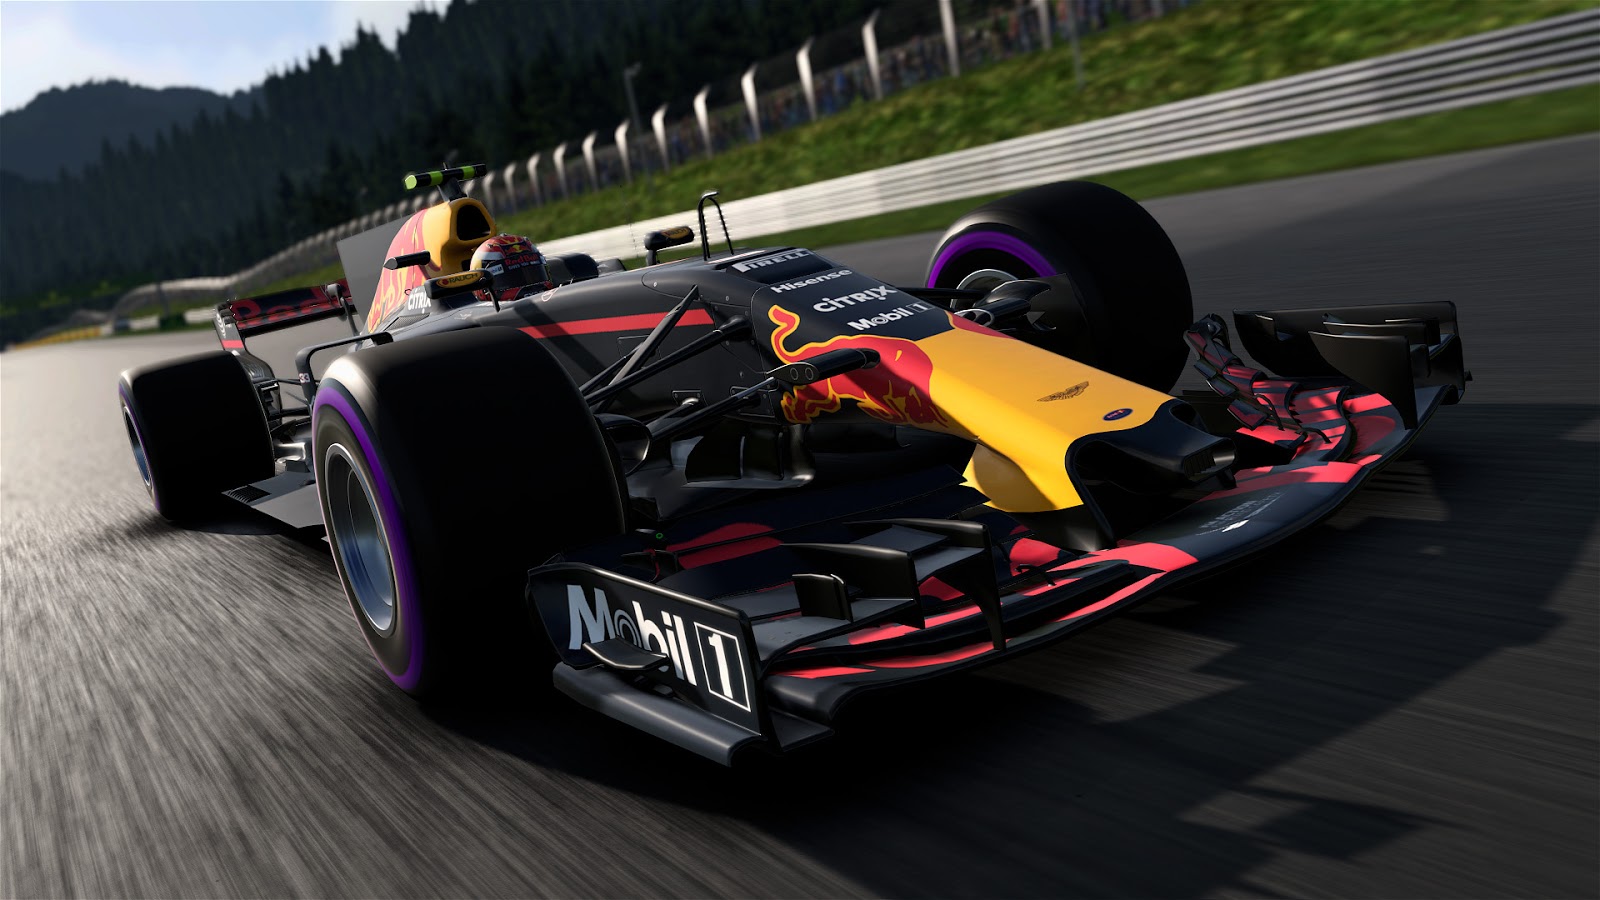 F1 2017 PC Game Free Full Version Download in Utorrent All Games